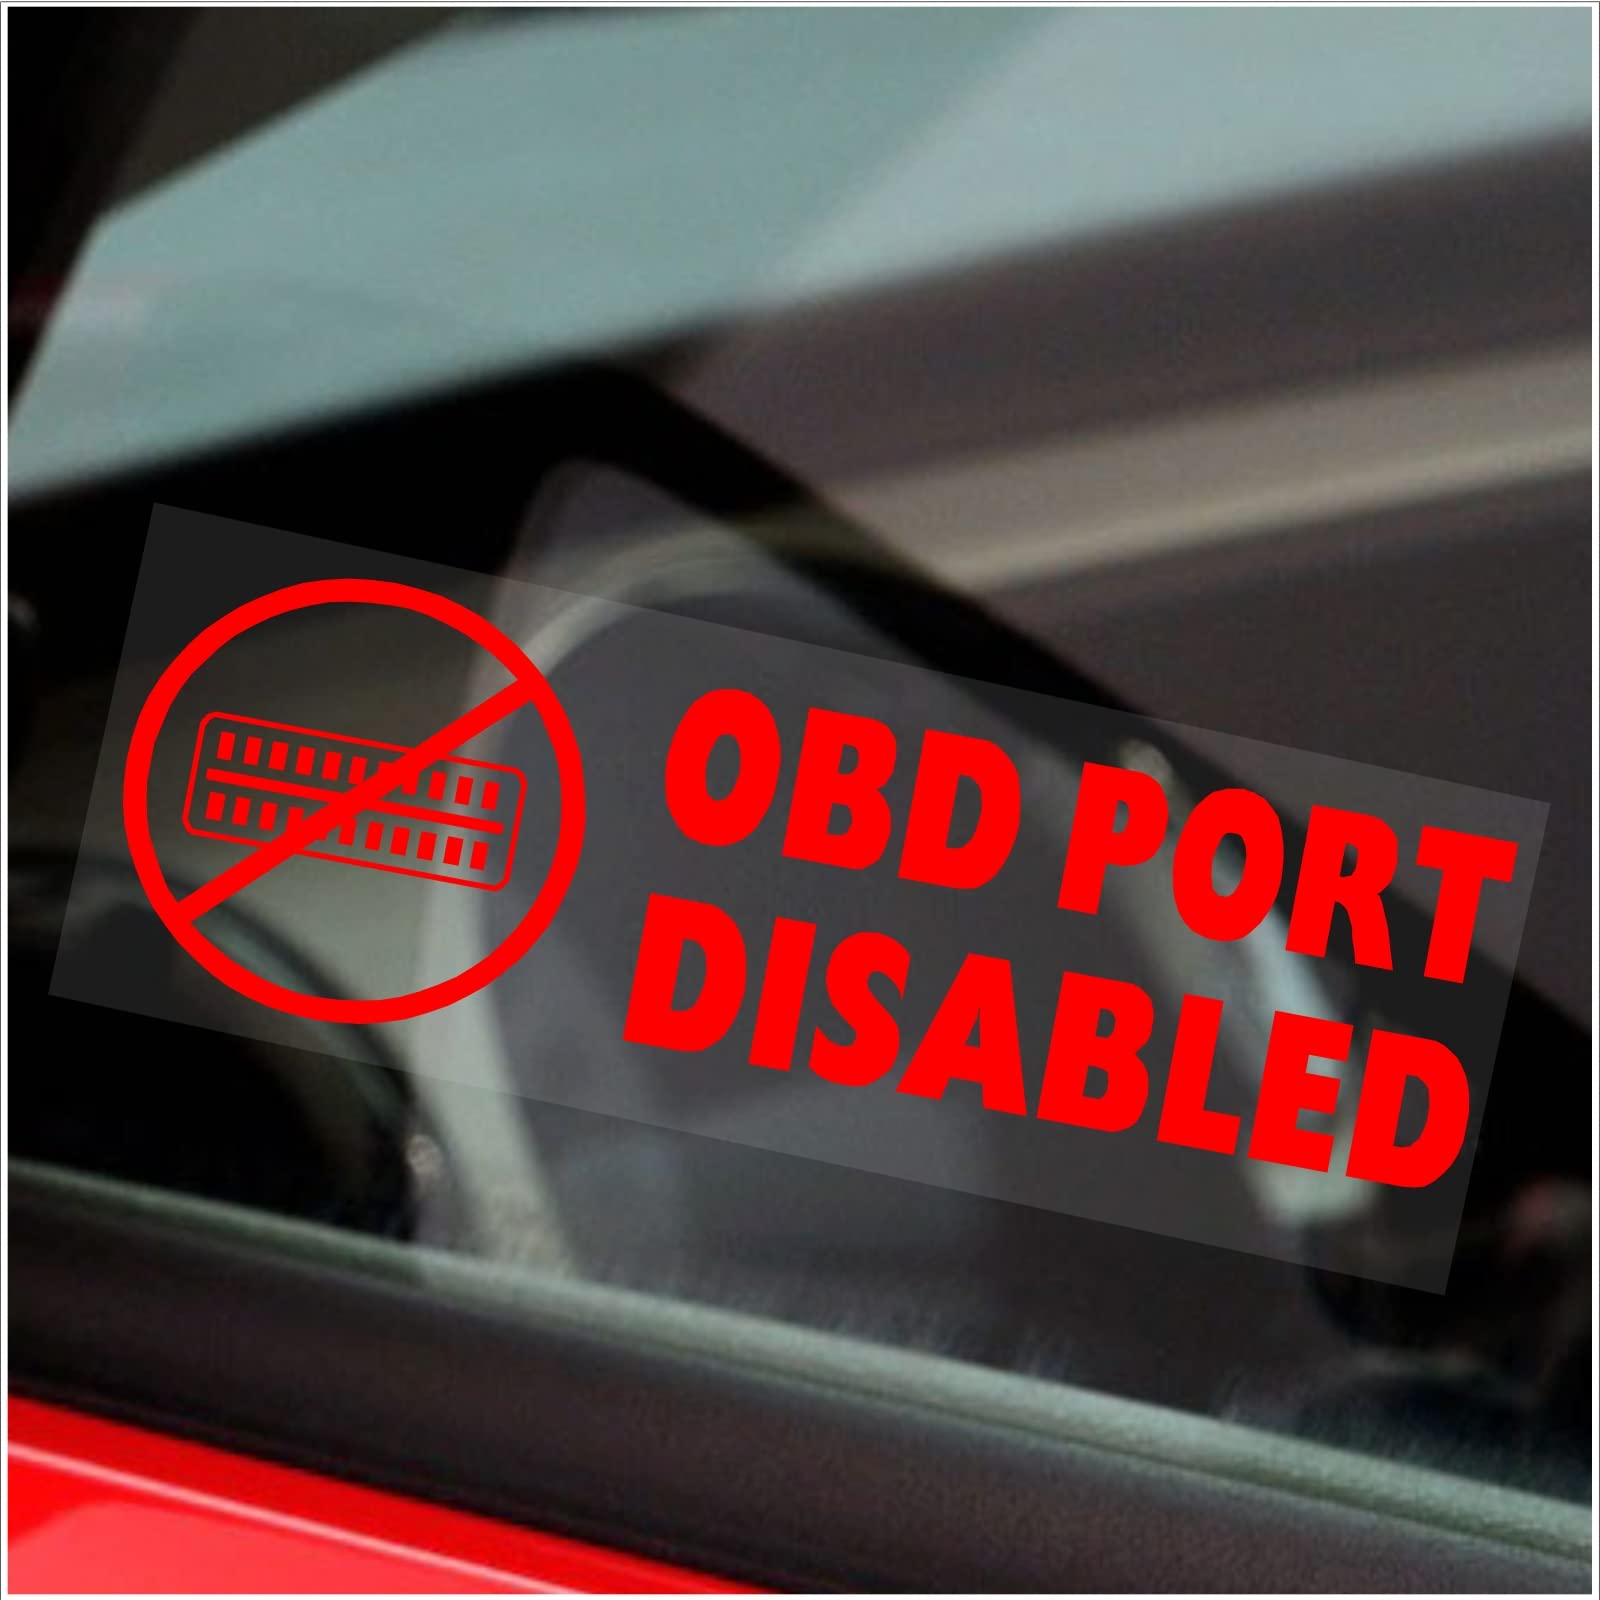 5 x OBD Port Behinderte stickers-red/clear-87 mm X 30 mm-security Fenster ACHTUNG signs-van, LKW, LKW, Taxi, Bus, Mini Cab, Minicab. On Board Diagnose-Anschluss immobilsed von Platinum Place